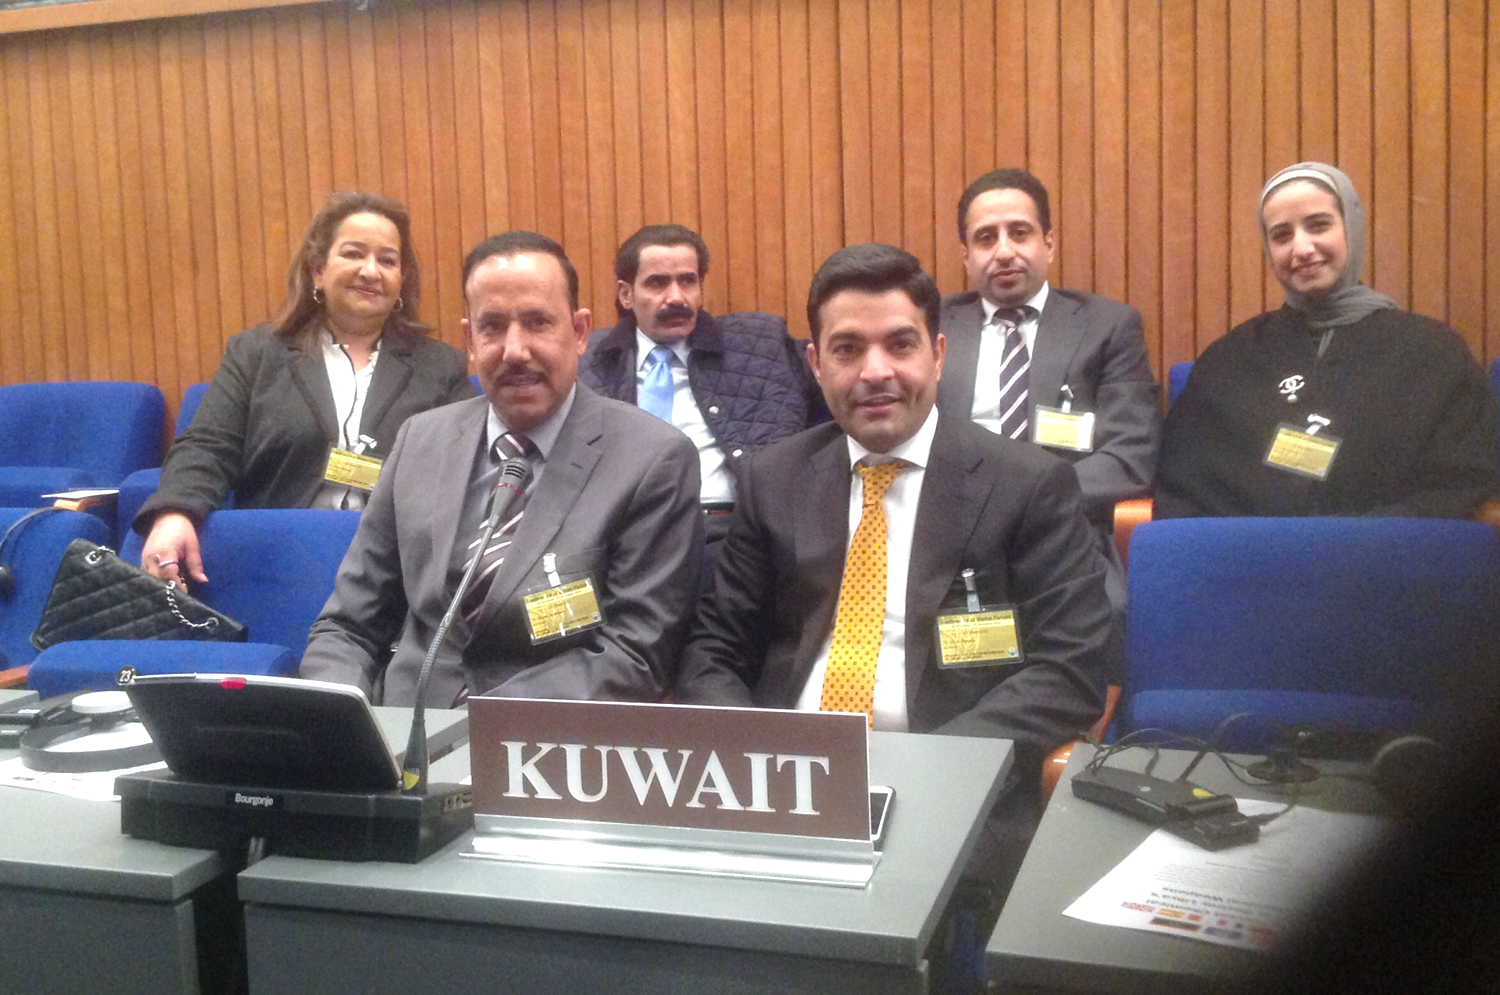 Ali Salem Al-Thaidhi, head of the Kuwaiti delegation to the conference of 21st